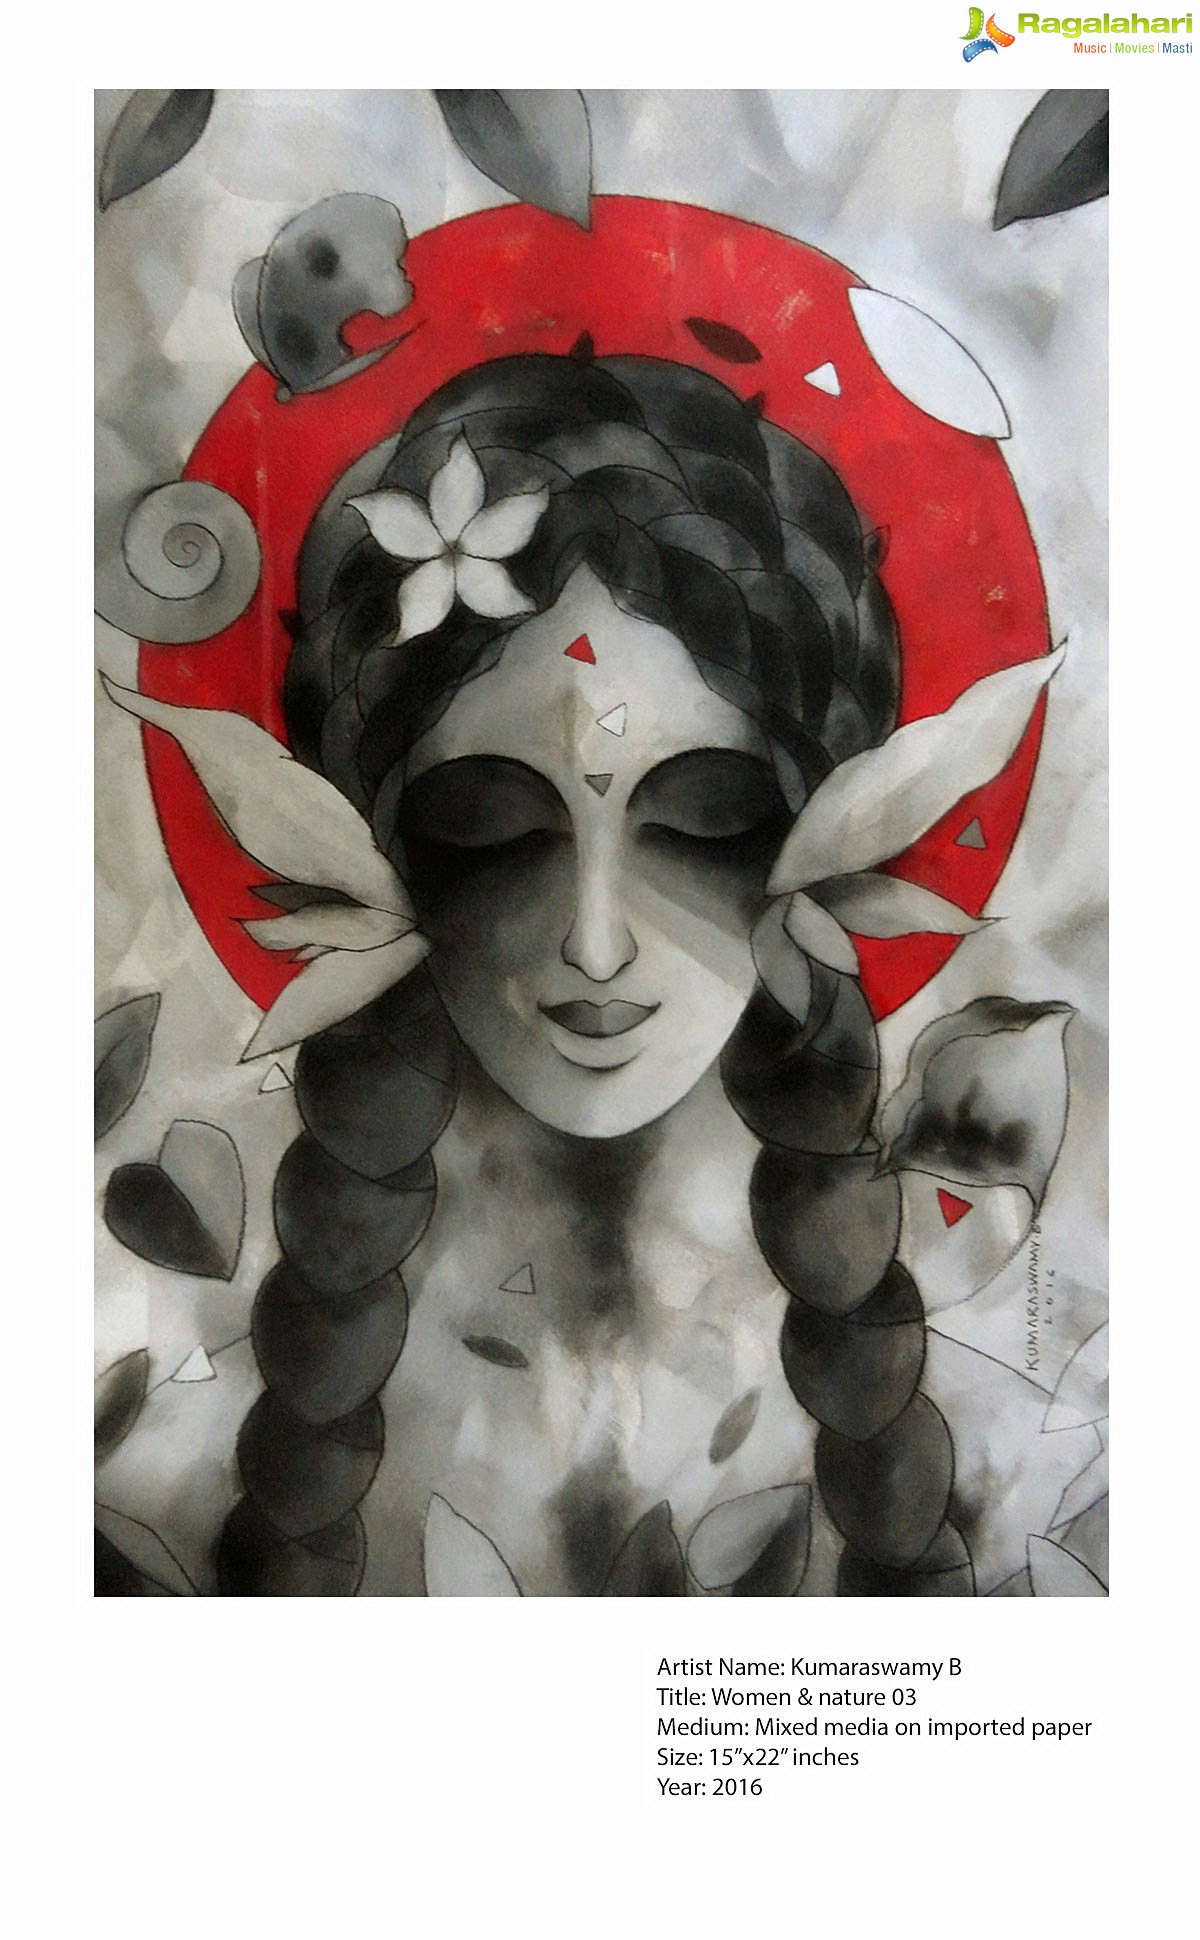 Metamorphosis - Solo Exhibition of Paintings by Kumarswamy B at The Gallery Cafe